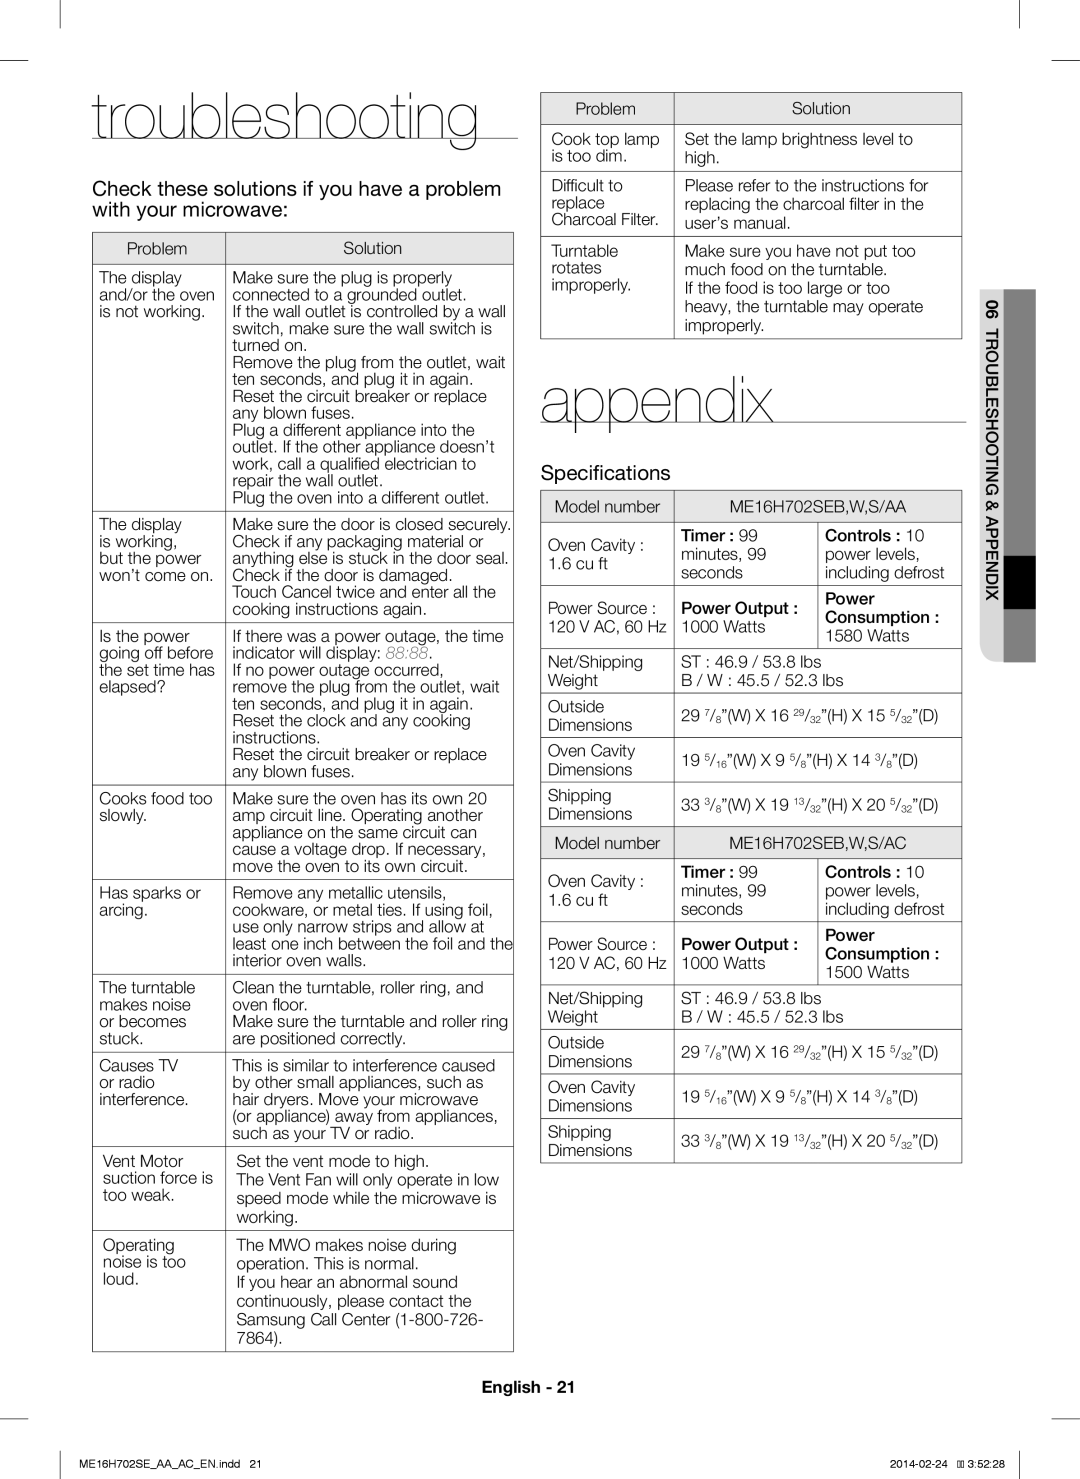 Samsung ME16H702SE user manual troubleshooting, appendix, Specifications, English 